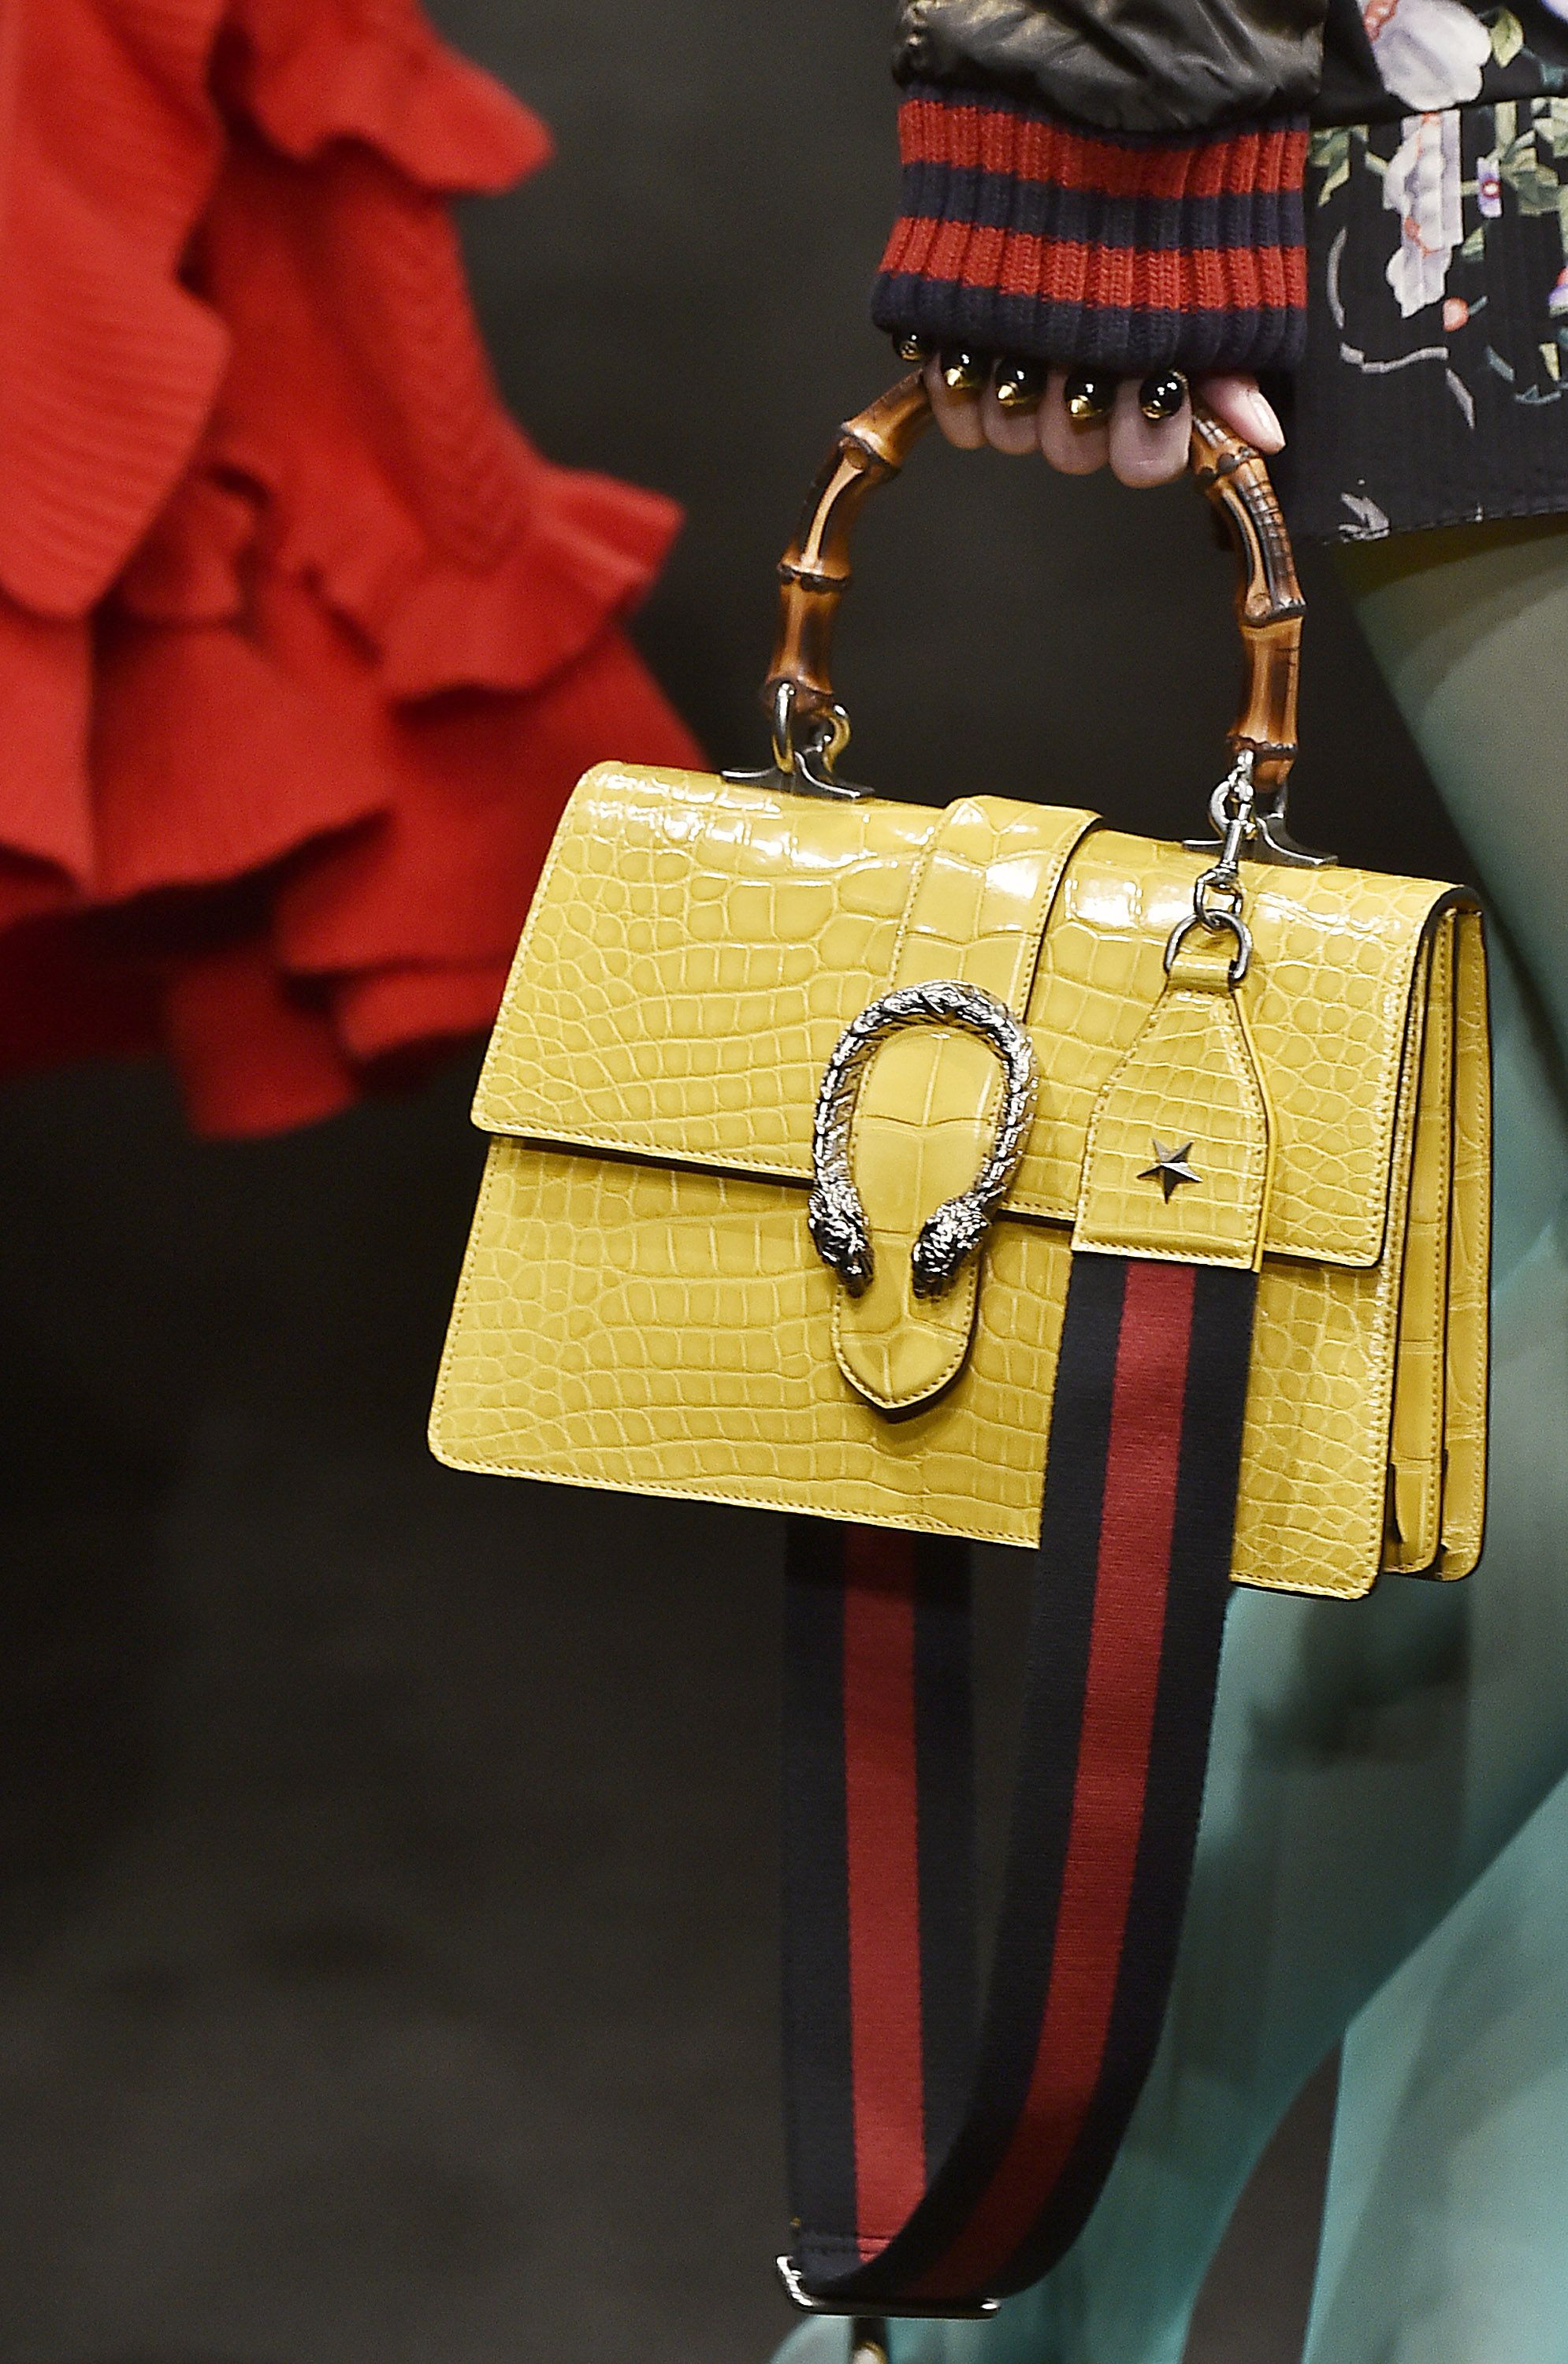 Why vintage designer handbags are making a SERIOUS comeback